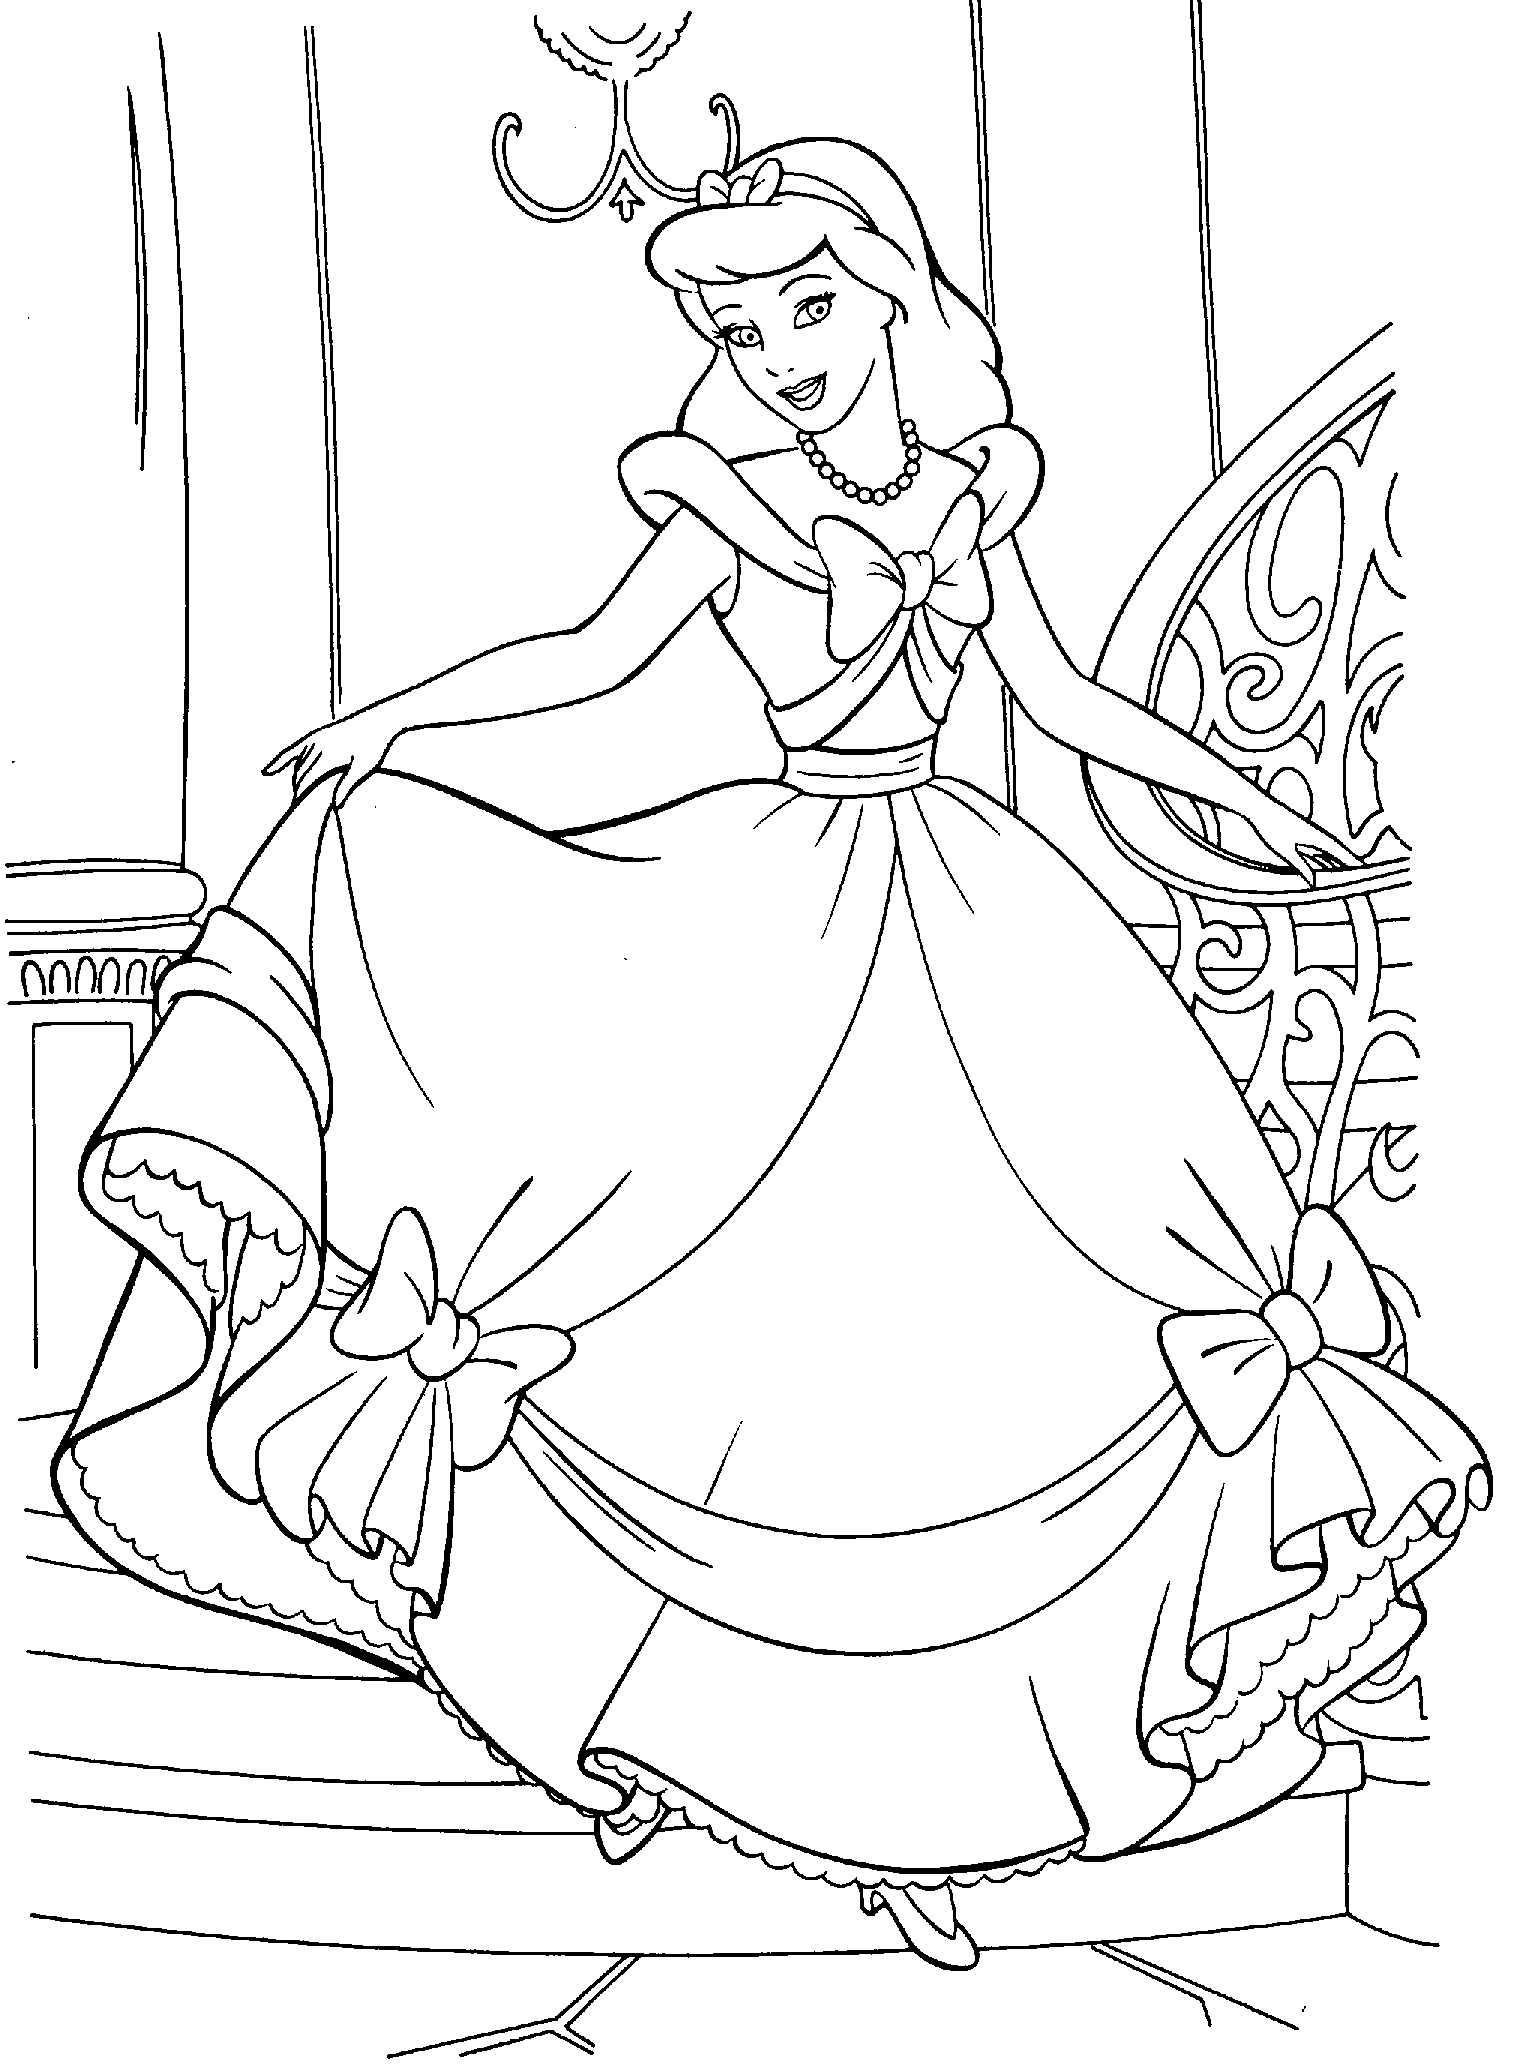 colering pages fun coloring pages frozen coloring pages pages colering 